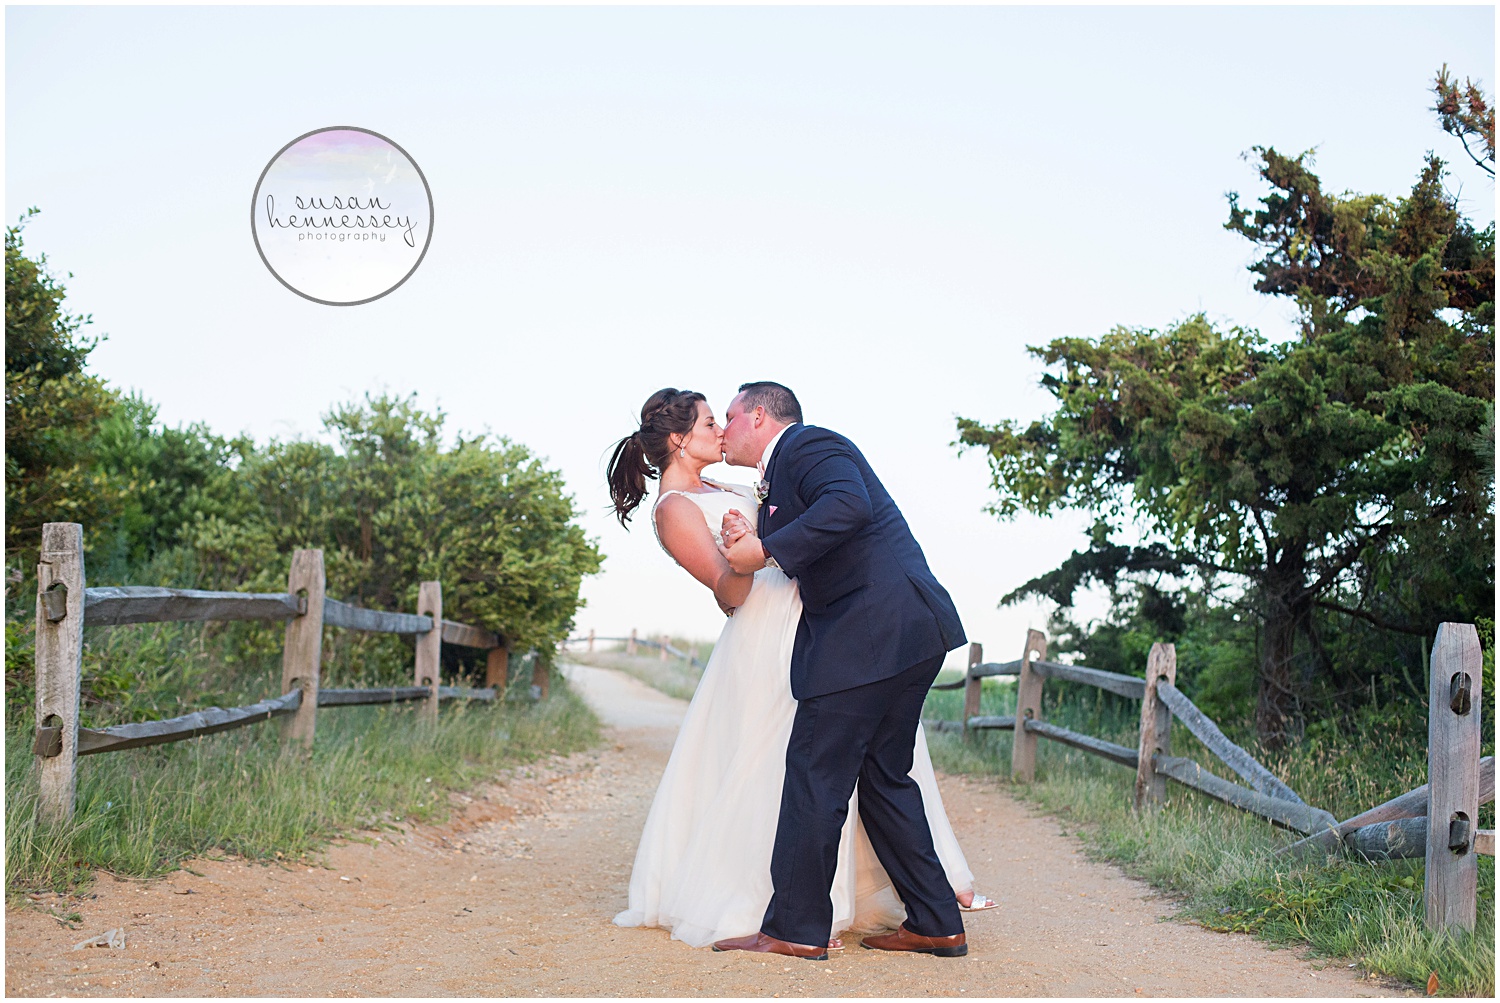 Icona Golden Inn Wedding - Photography by Susan Hennessey Photography